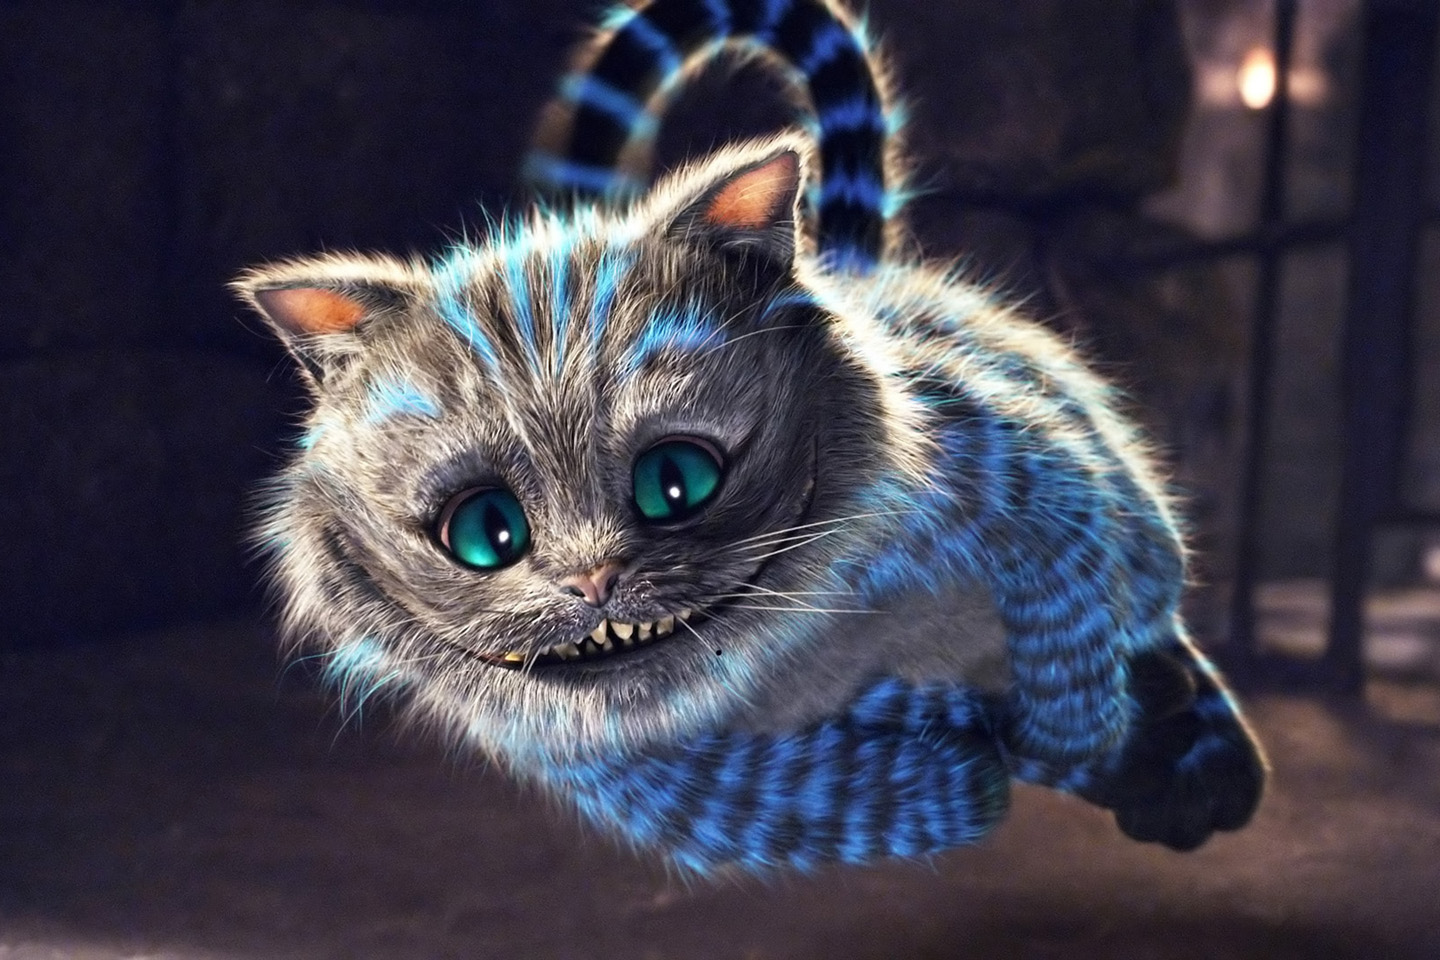  Cats Cheshire Cat Hd N Backgrounds Wallpaper Full HD Wallpapers